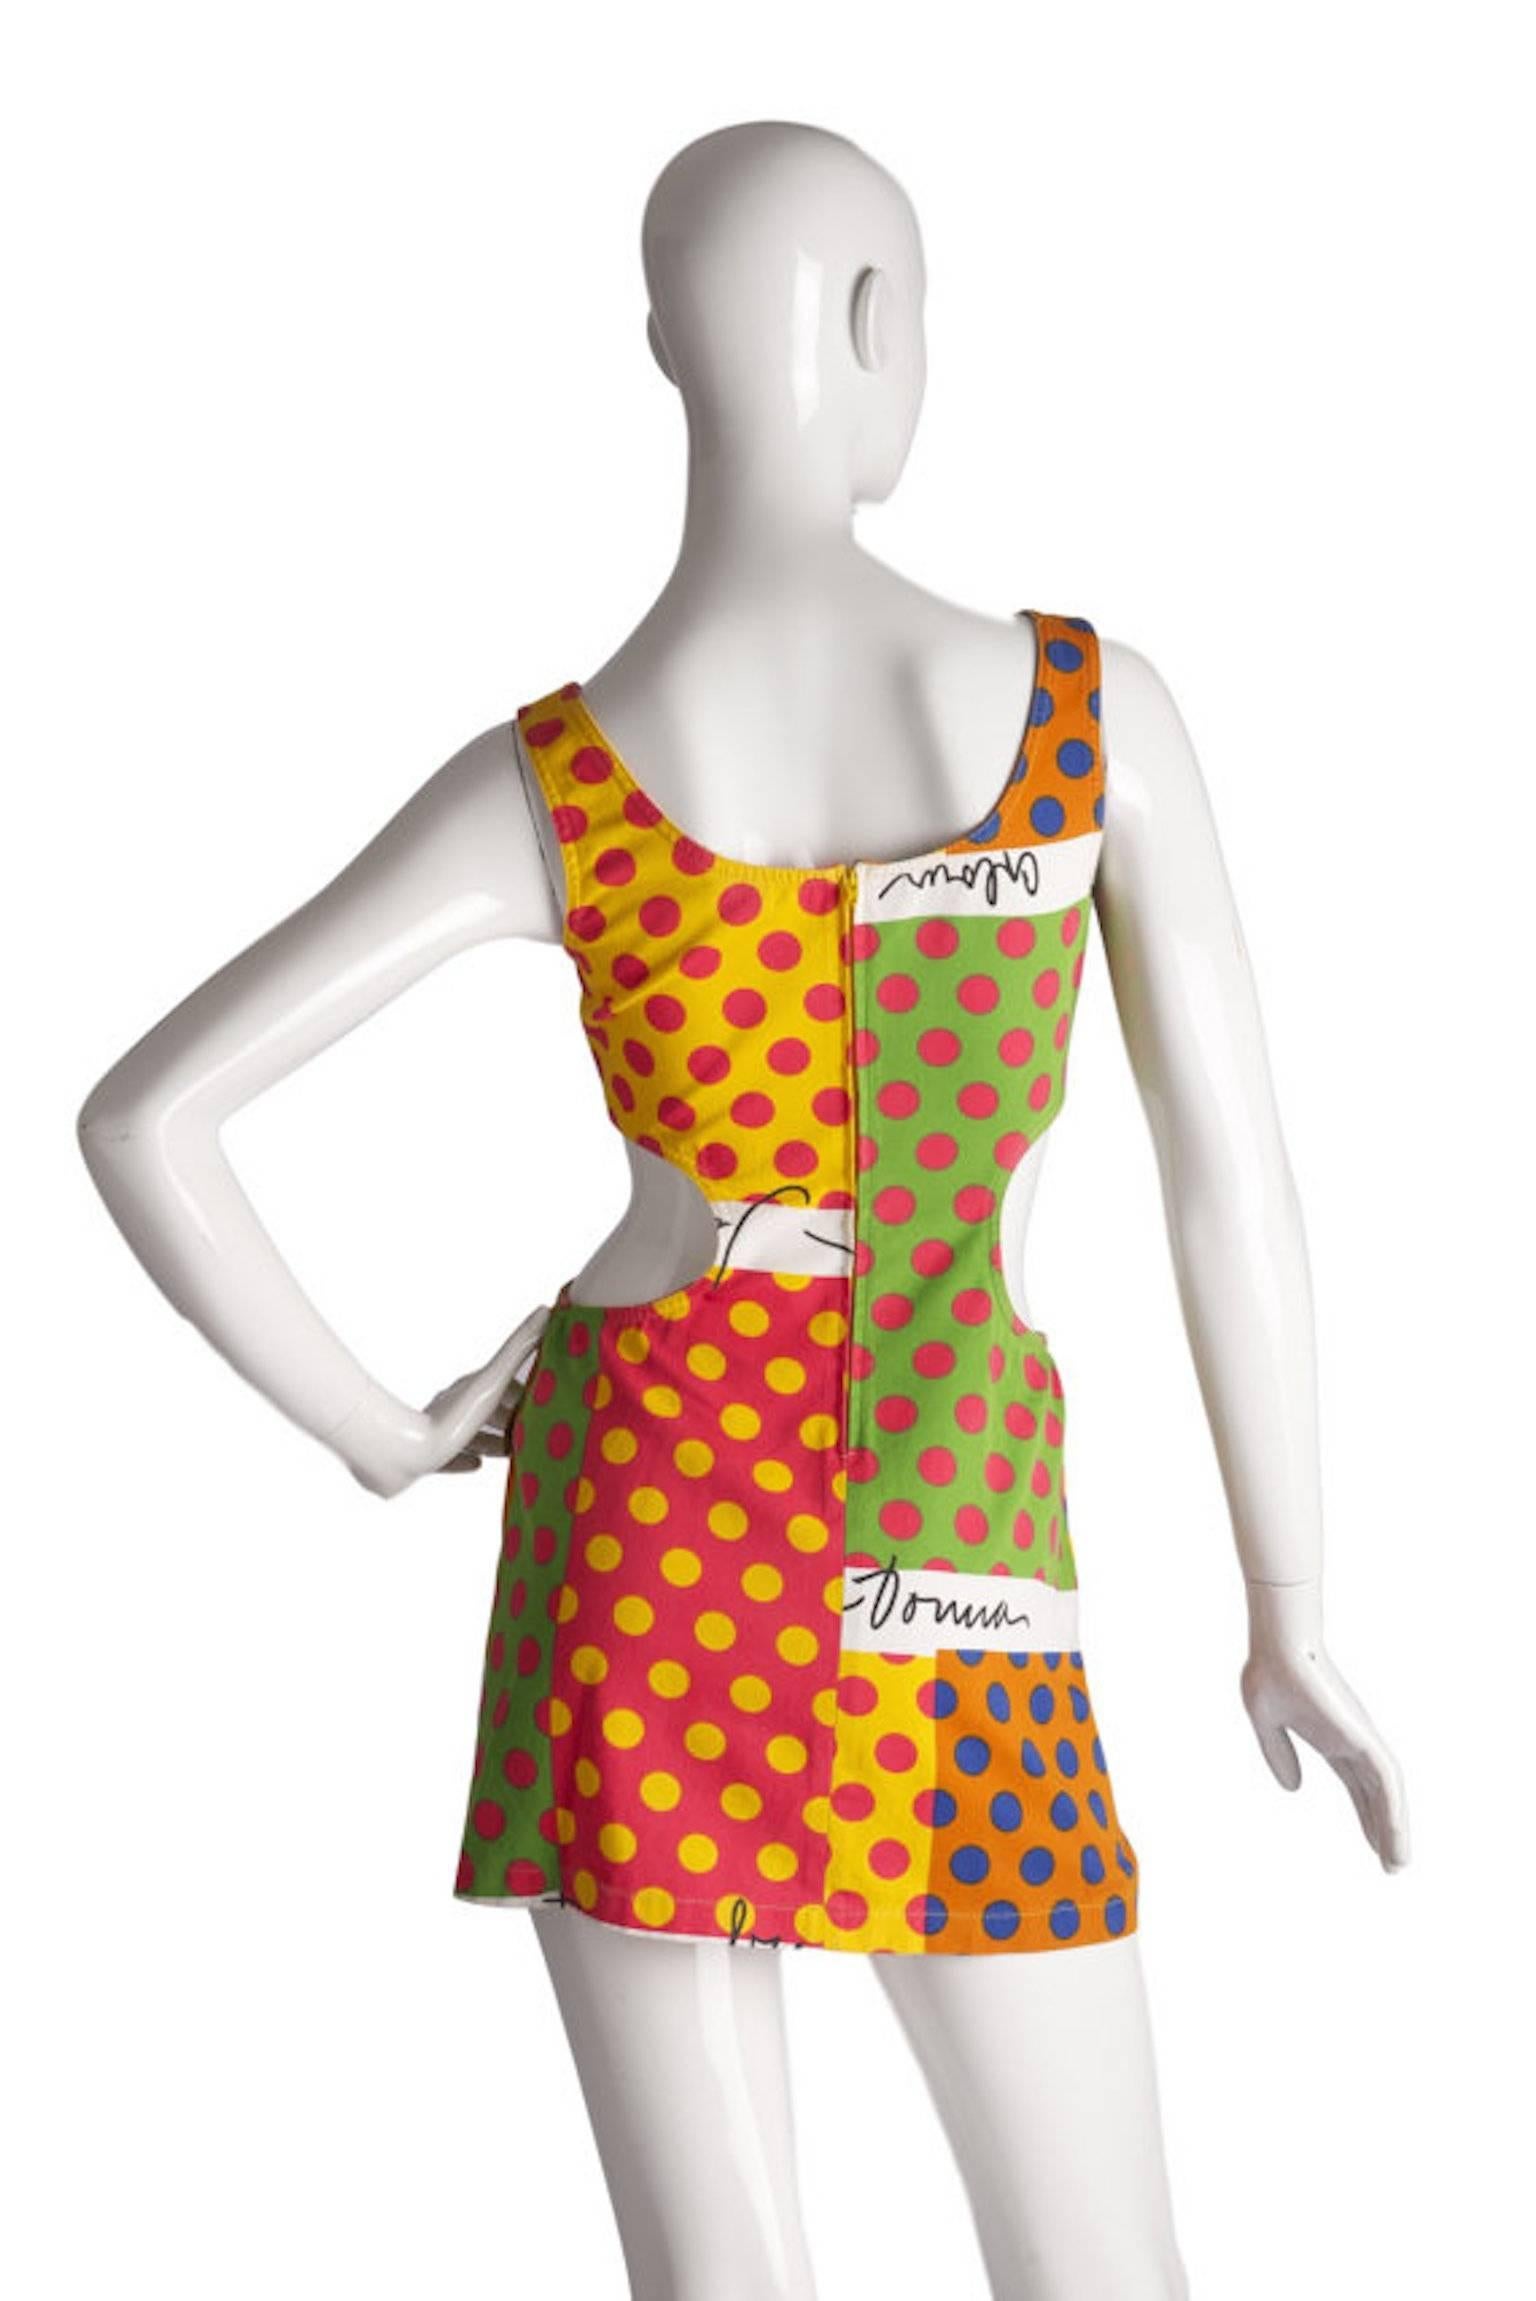 
Moschino Jeans vintage mid 90s cut out design mini dress. Brightly coloured and mixed print in cotton, with zip back fastening.

Size UK 8 measures 16.5 inches across bust and 30.5 inches length. 